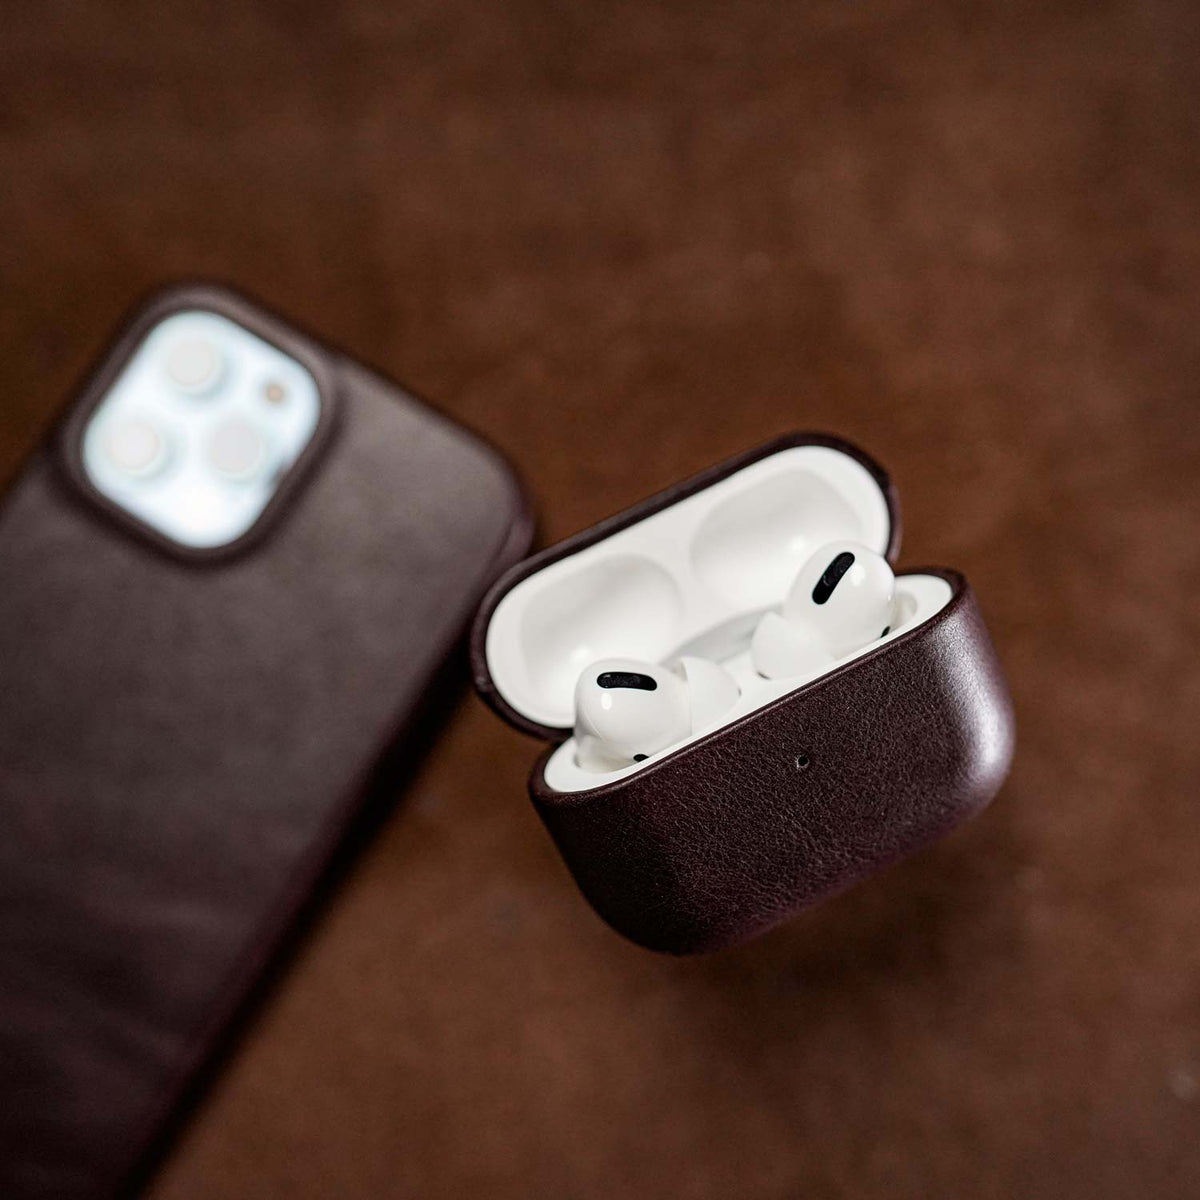 Leather AirPods Pro (2nd Generation) Case - Dark Brown